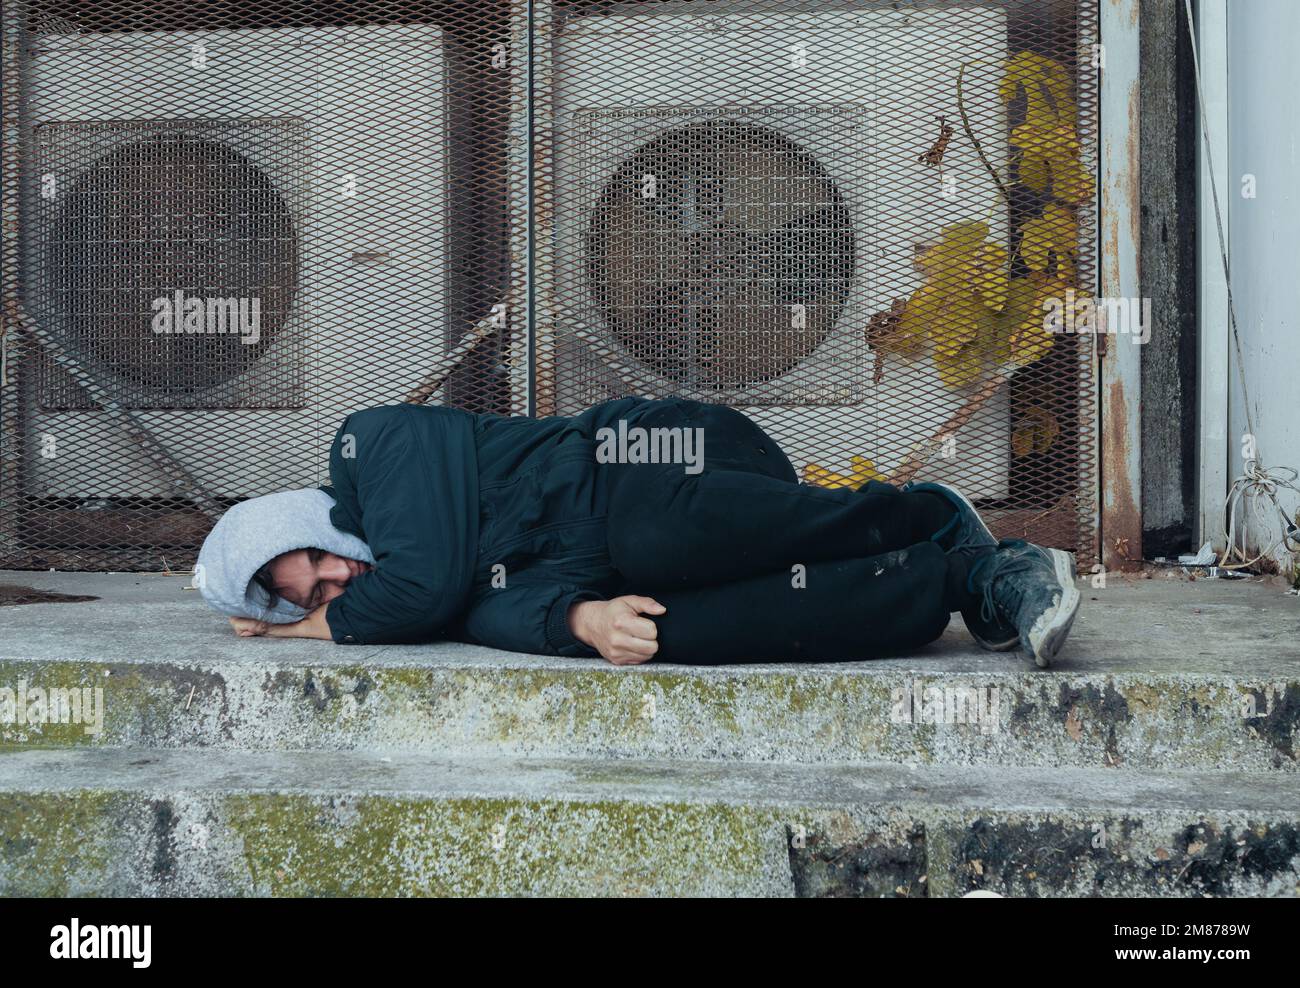 Frozen homeless man sleeps on concrete near building's ventilation system. Problem of how homeless survive winter cold. Stock Photo